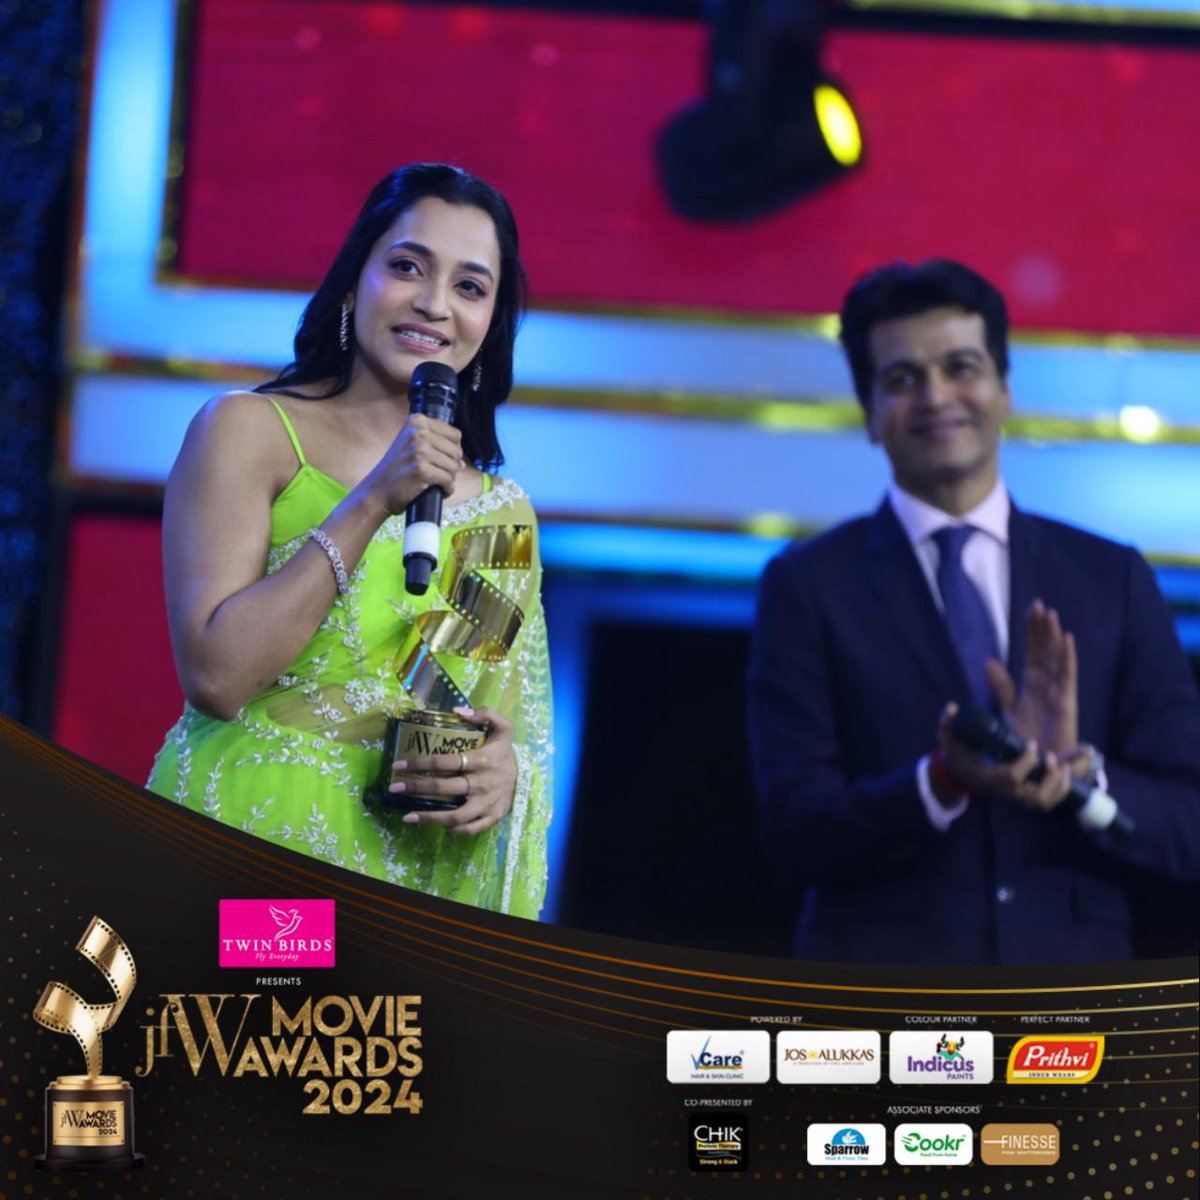 .@abarnathi21 wins Best Actress in a Supporting Role, presented by @VinayRai1809 ! TWITTER: Title sponsor- @twinbirdsonline Powered by - @vcaregroups @josalukkas_ Perfect partner- Prithvi women's inner wear Colour partner - @indicus_in Co-presented by - chik_india Associate…